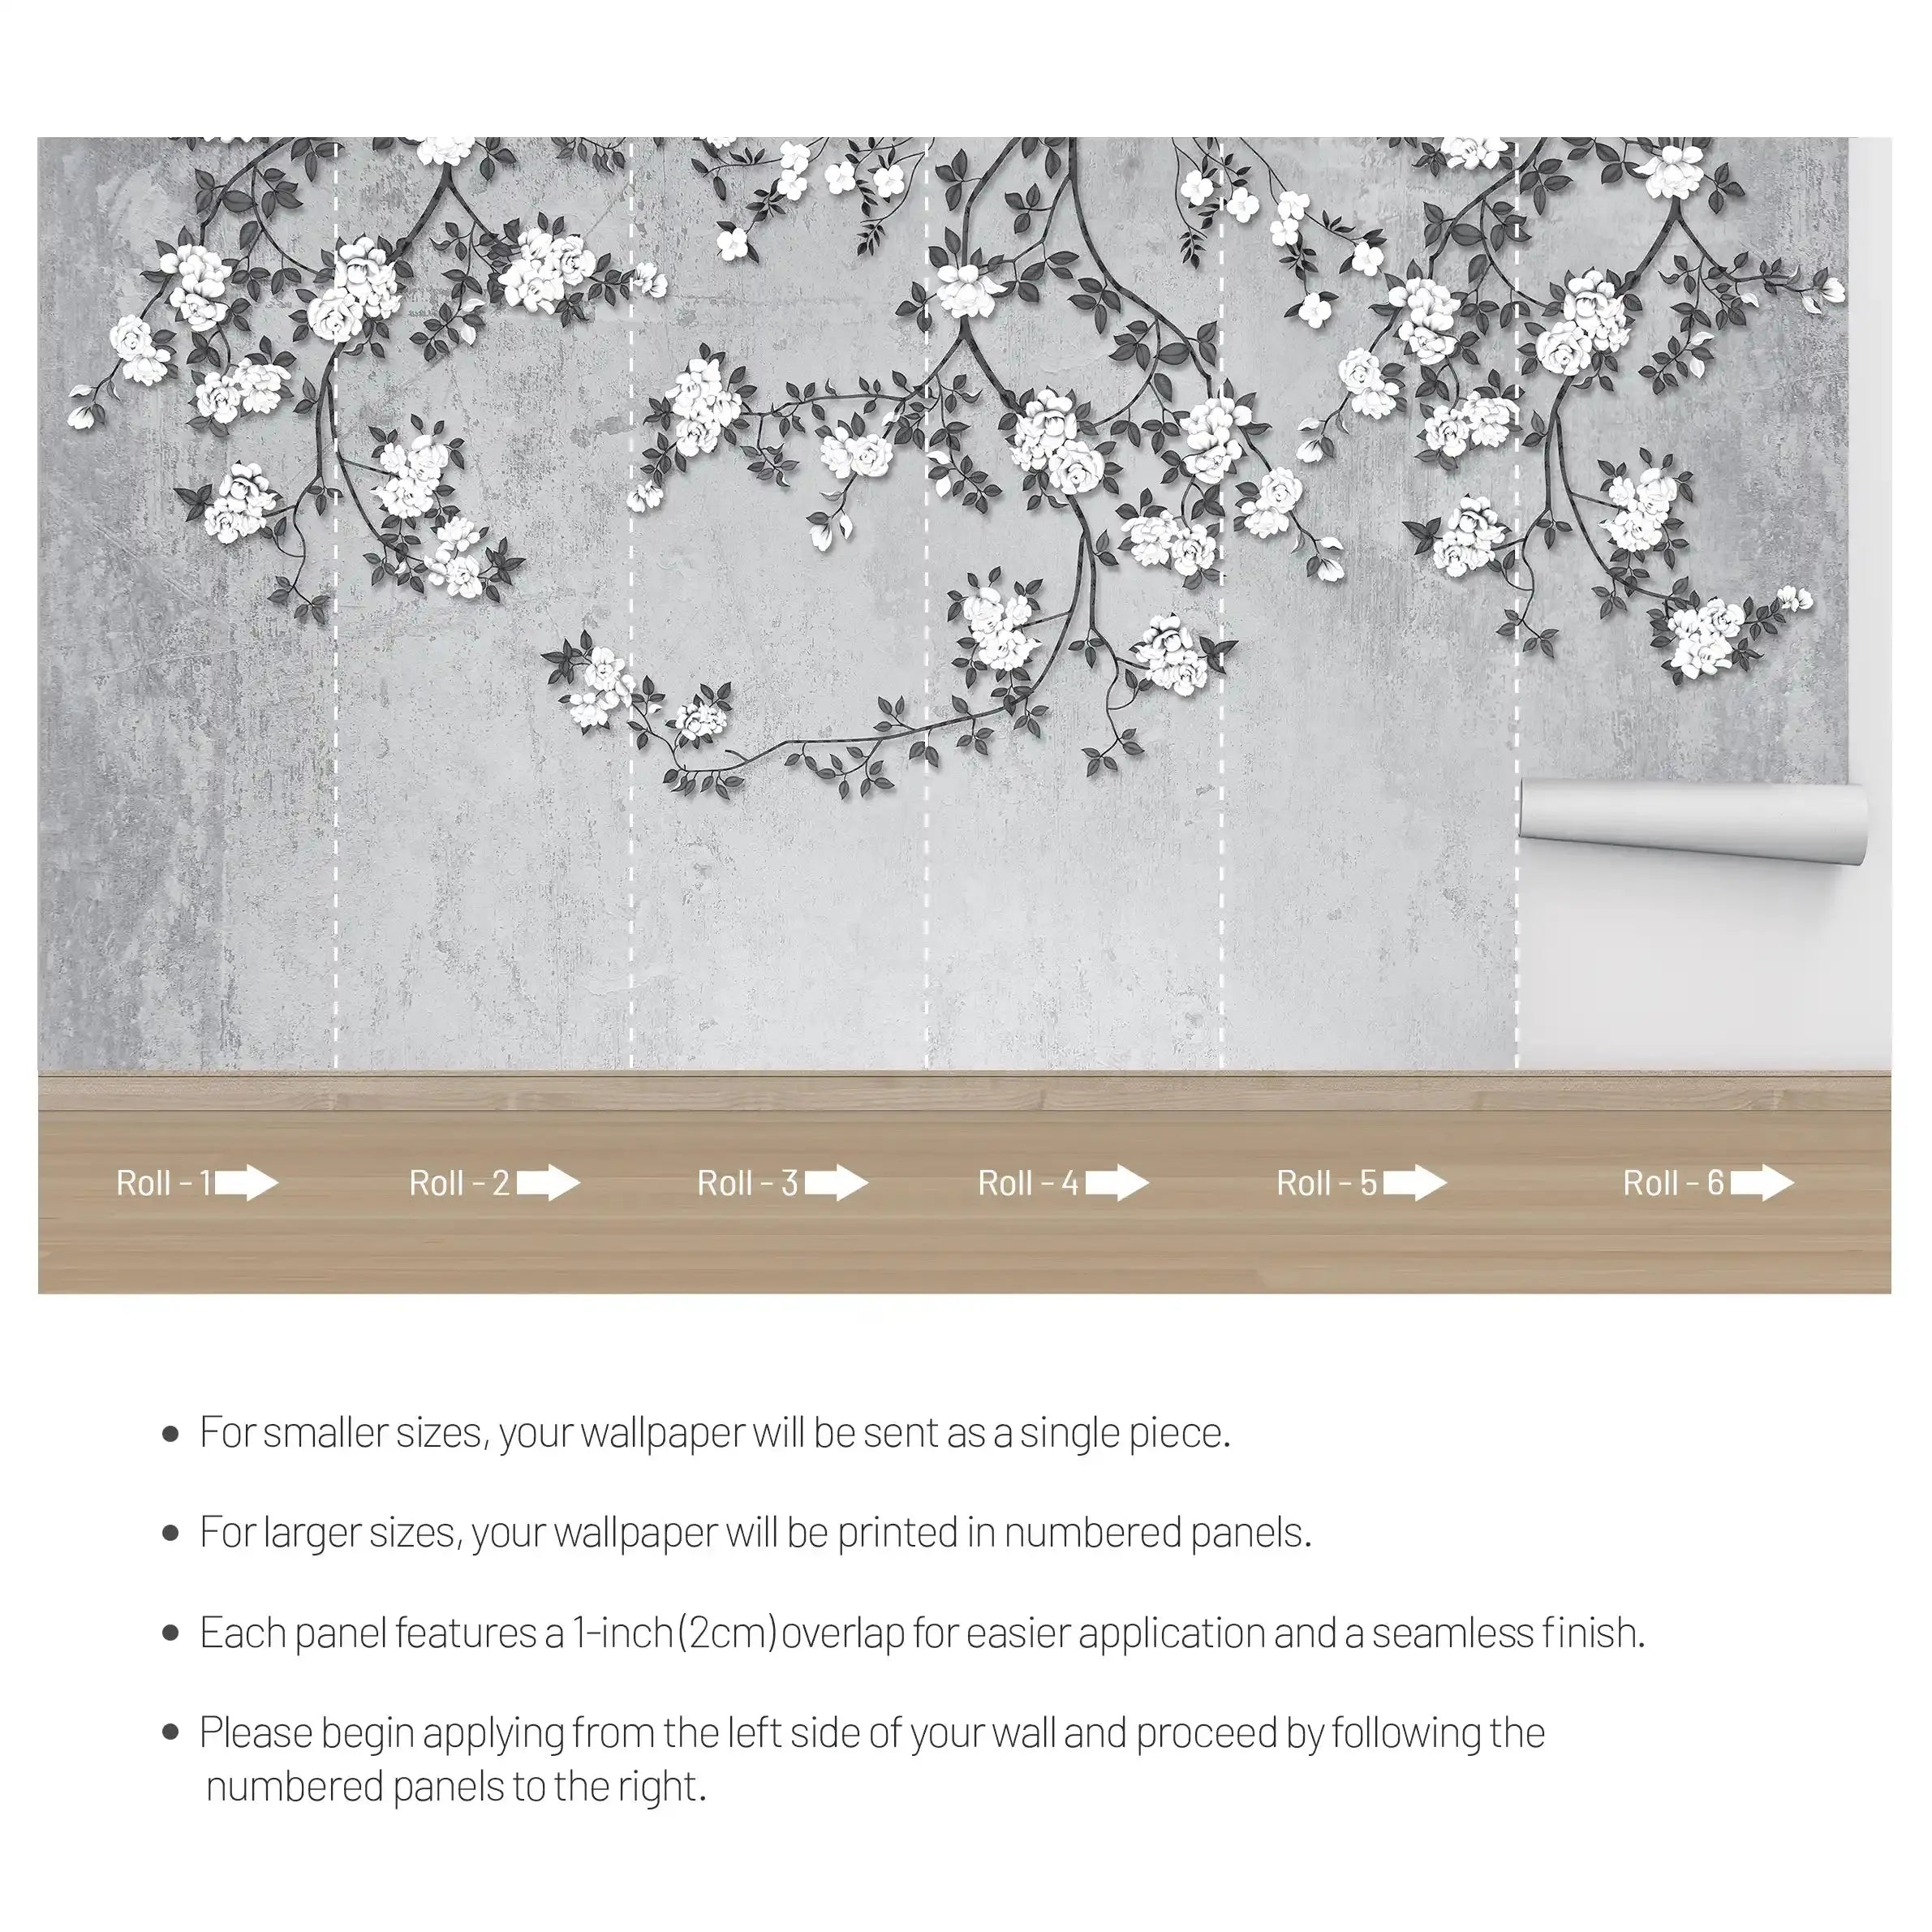 3028-E / Chinese Style Floral Peel and Stick Wallpaper: Easy Install, Adhesive Mural for Walls - Artevella